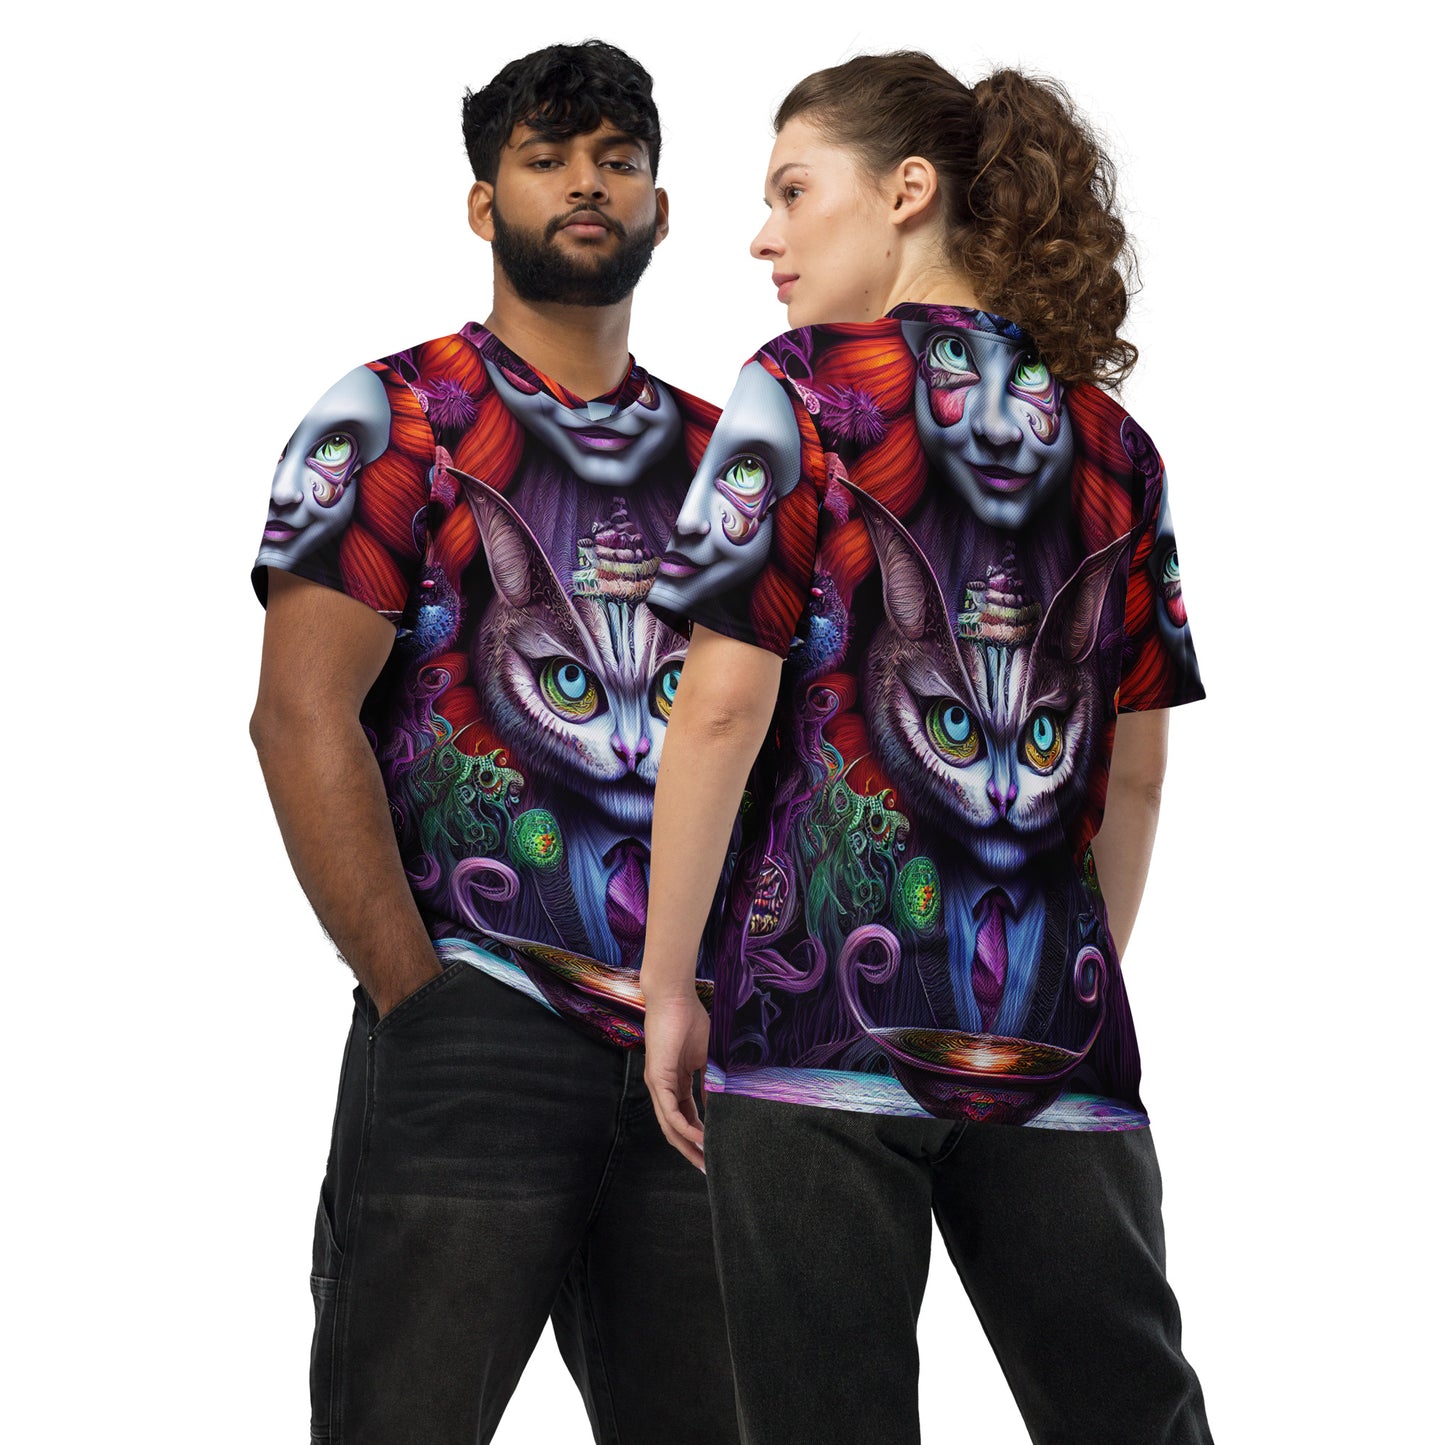 Cheshire Cat in Wonderland 1.0 Recycled unisex sports jersey